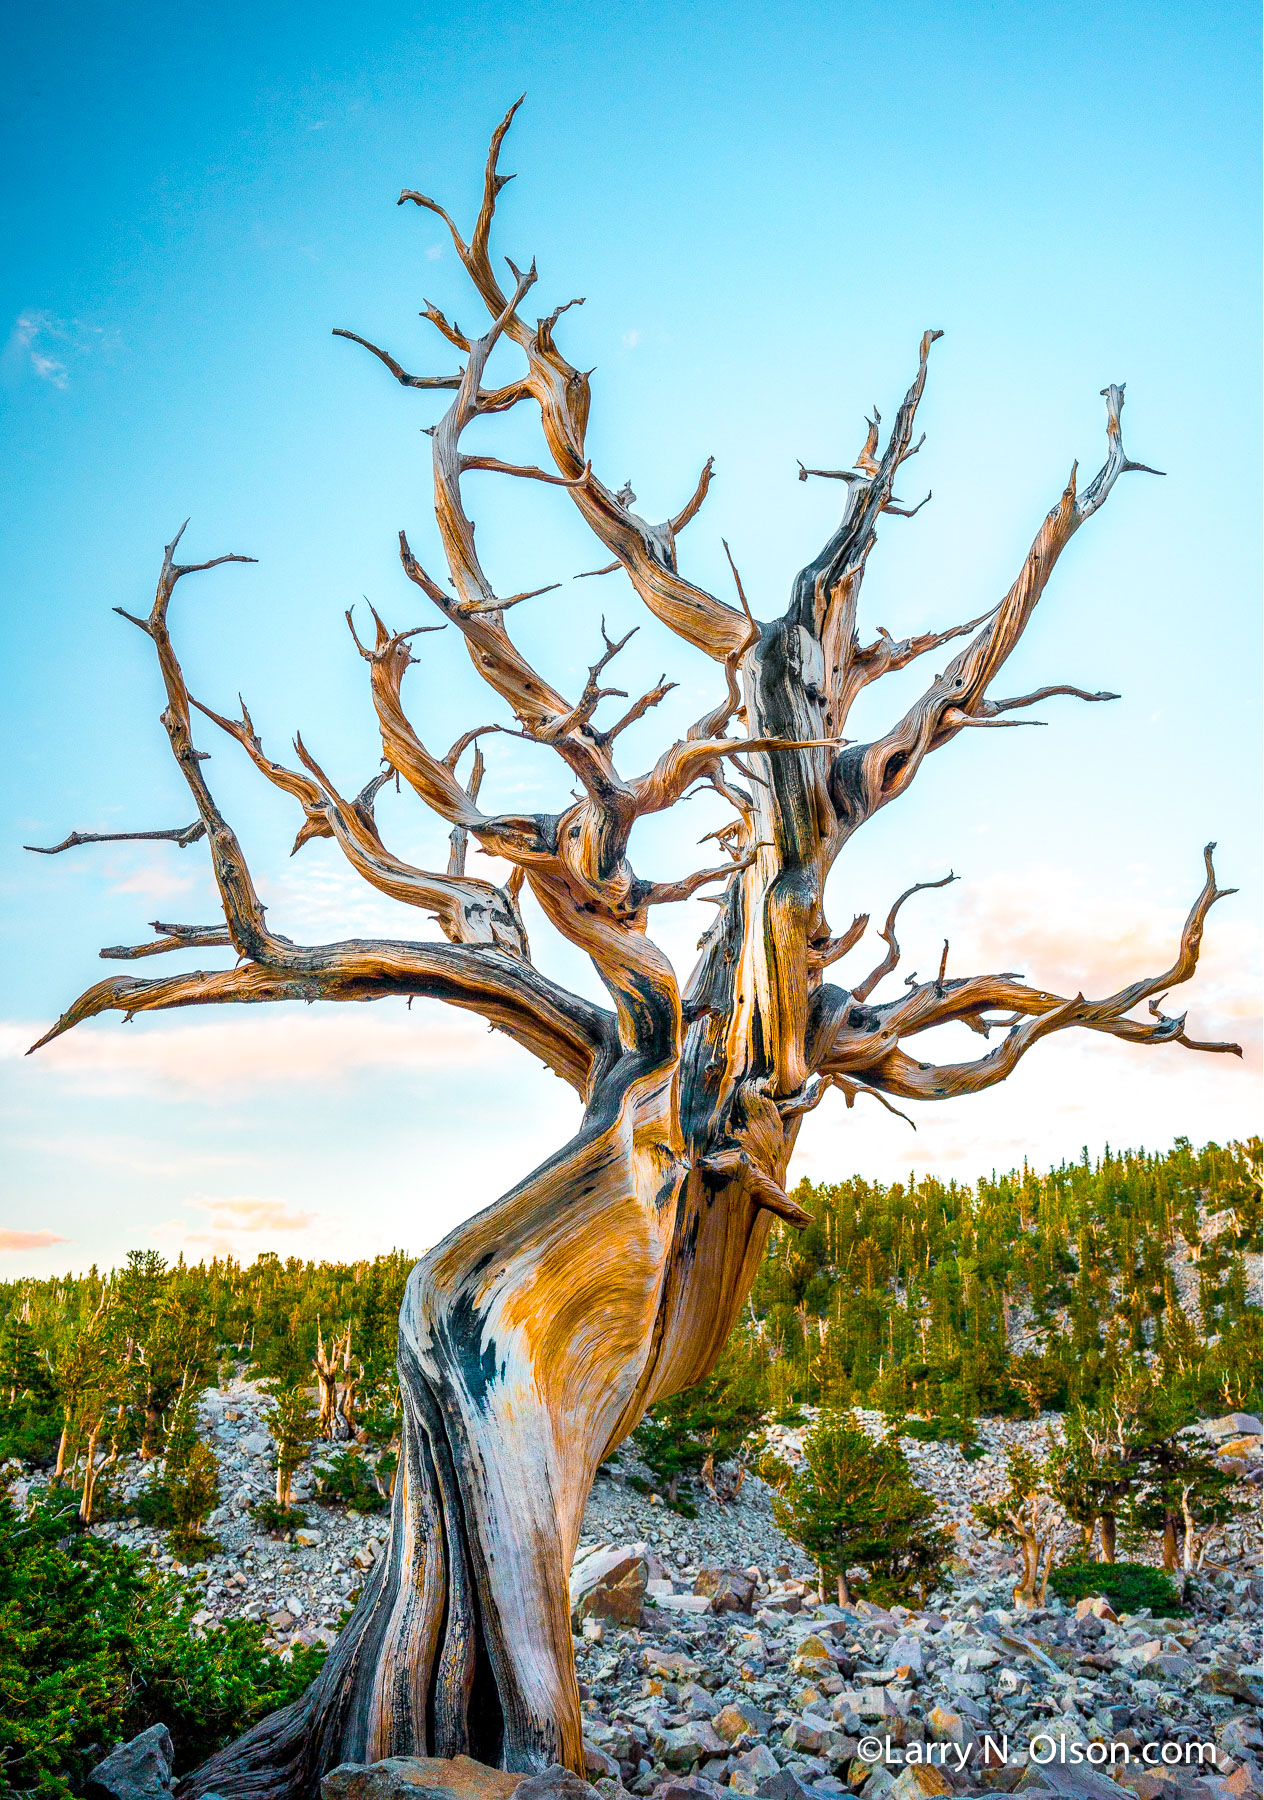 Bristlecone Pine, Great Basin National Park, Nevada | The soft light of dawn shows the beautiful weathered shape and colors of an ancient Bristlecone pine. This tree is dead and still standing, perhaps close to 5000 years old.